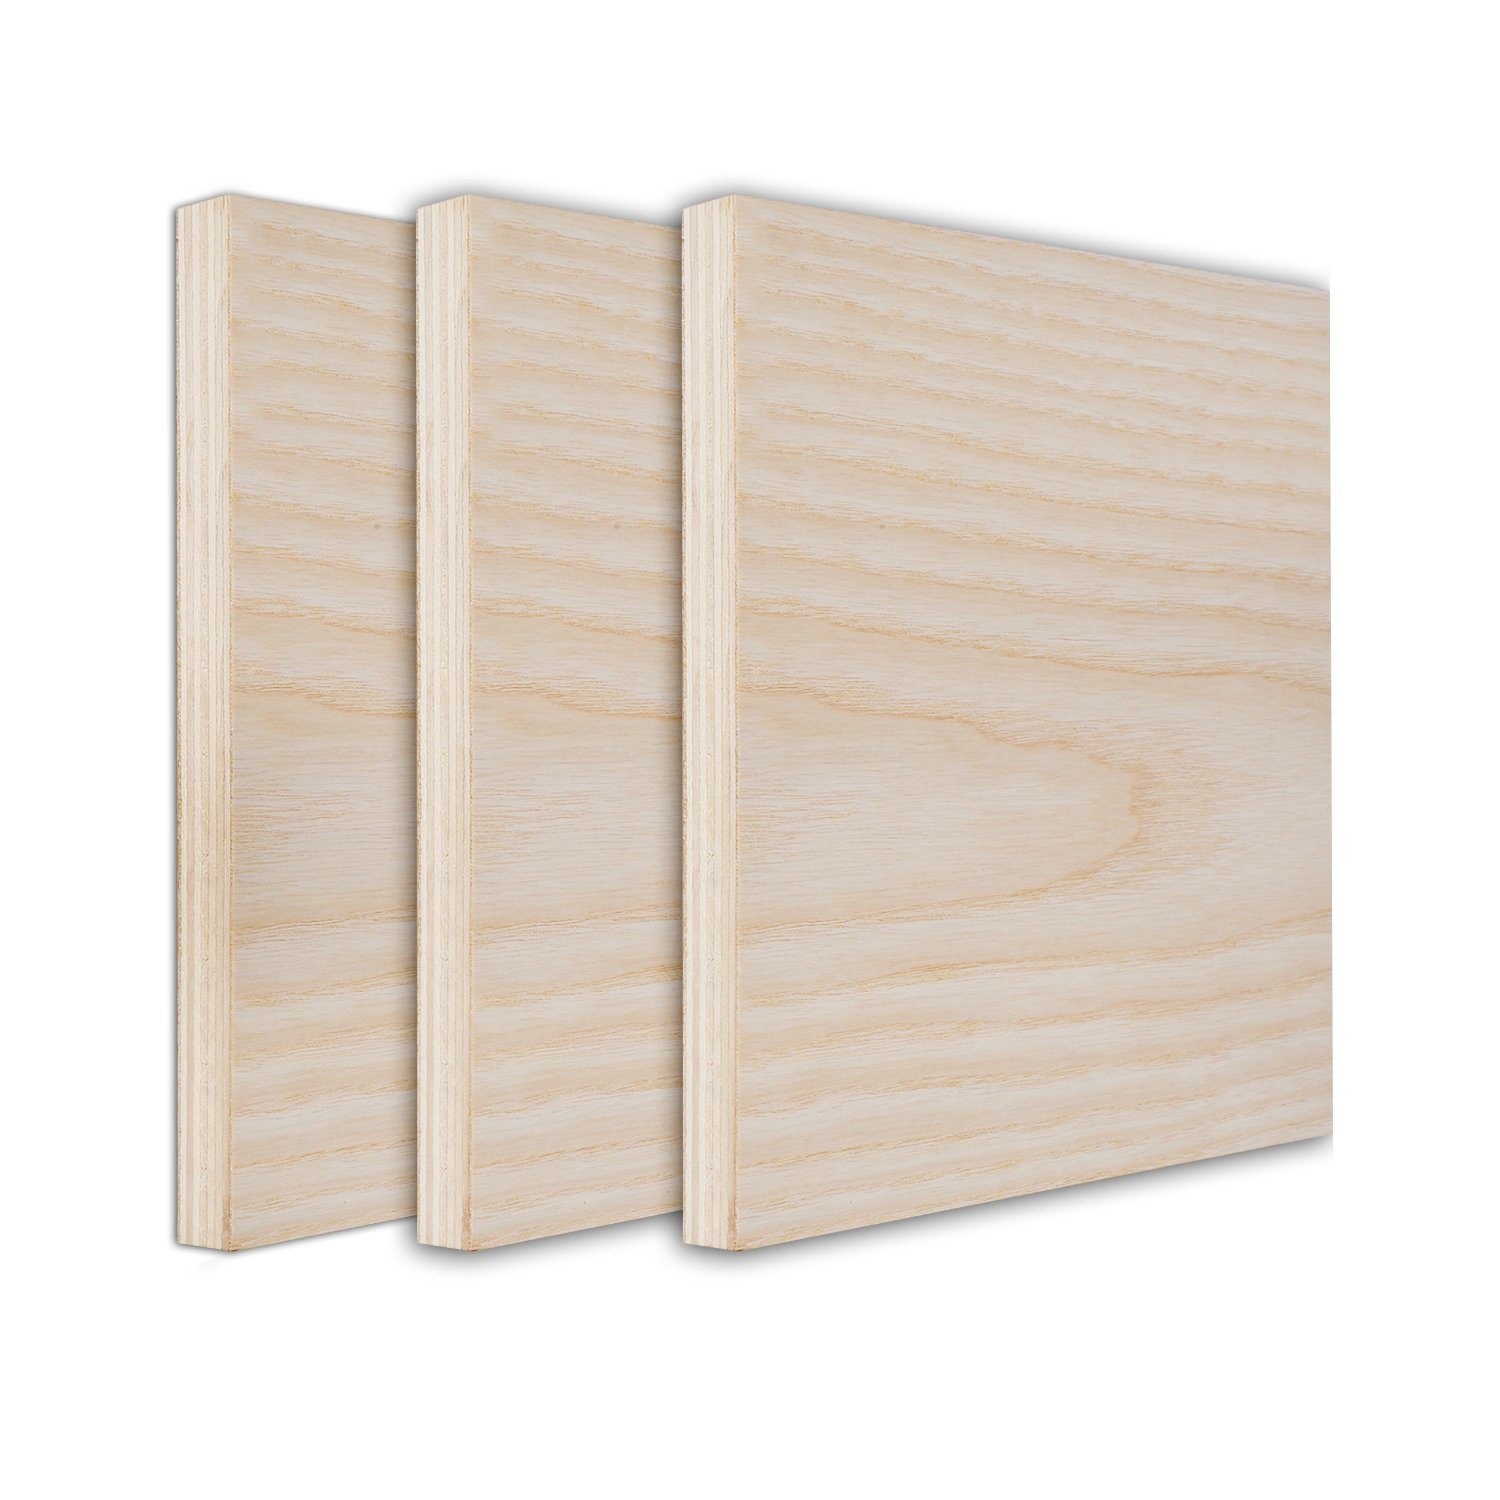 Construction Plywood Board Oak Wood Faced Plywood for Decoration